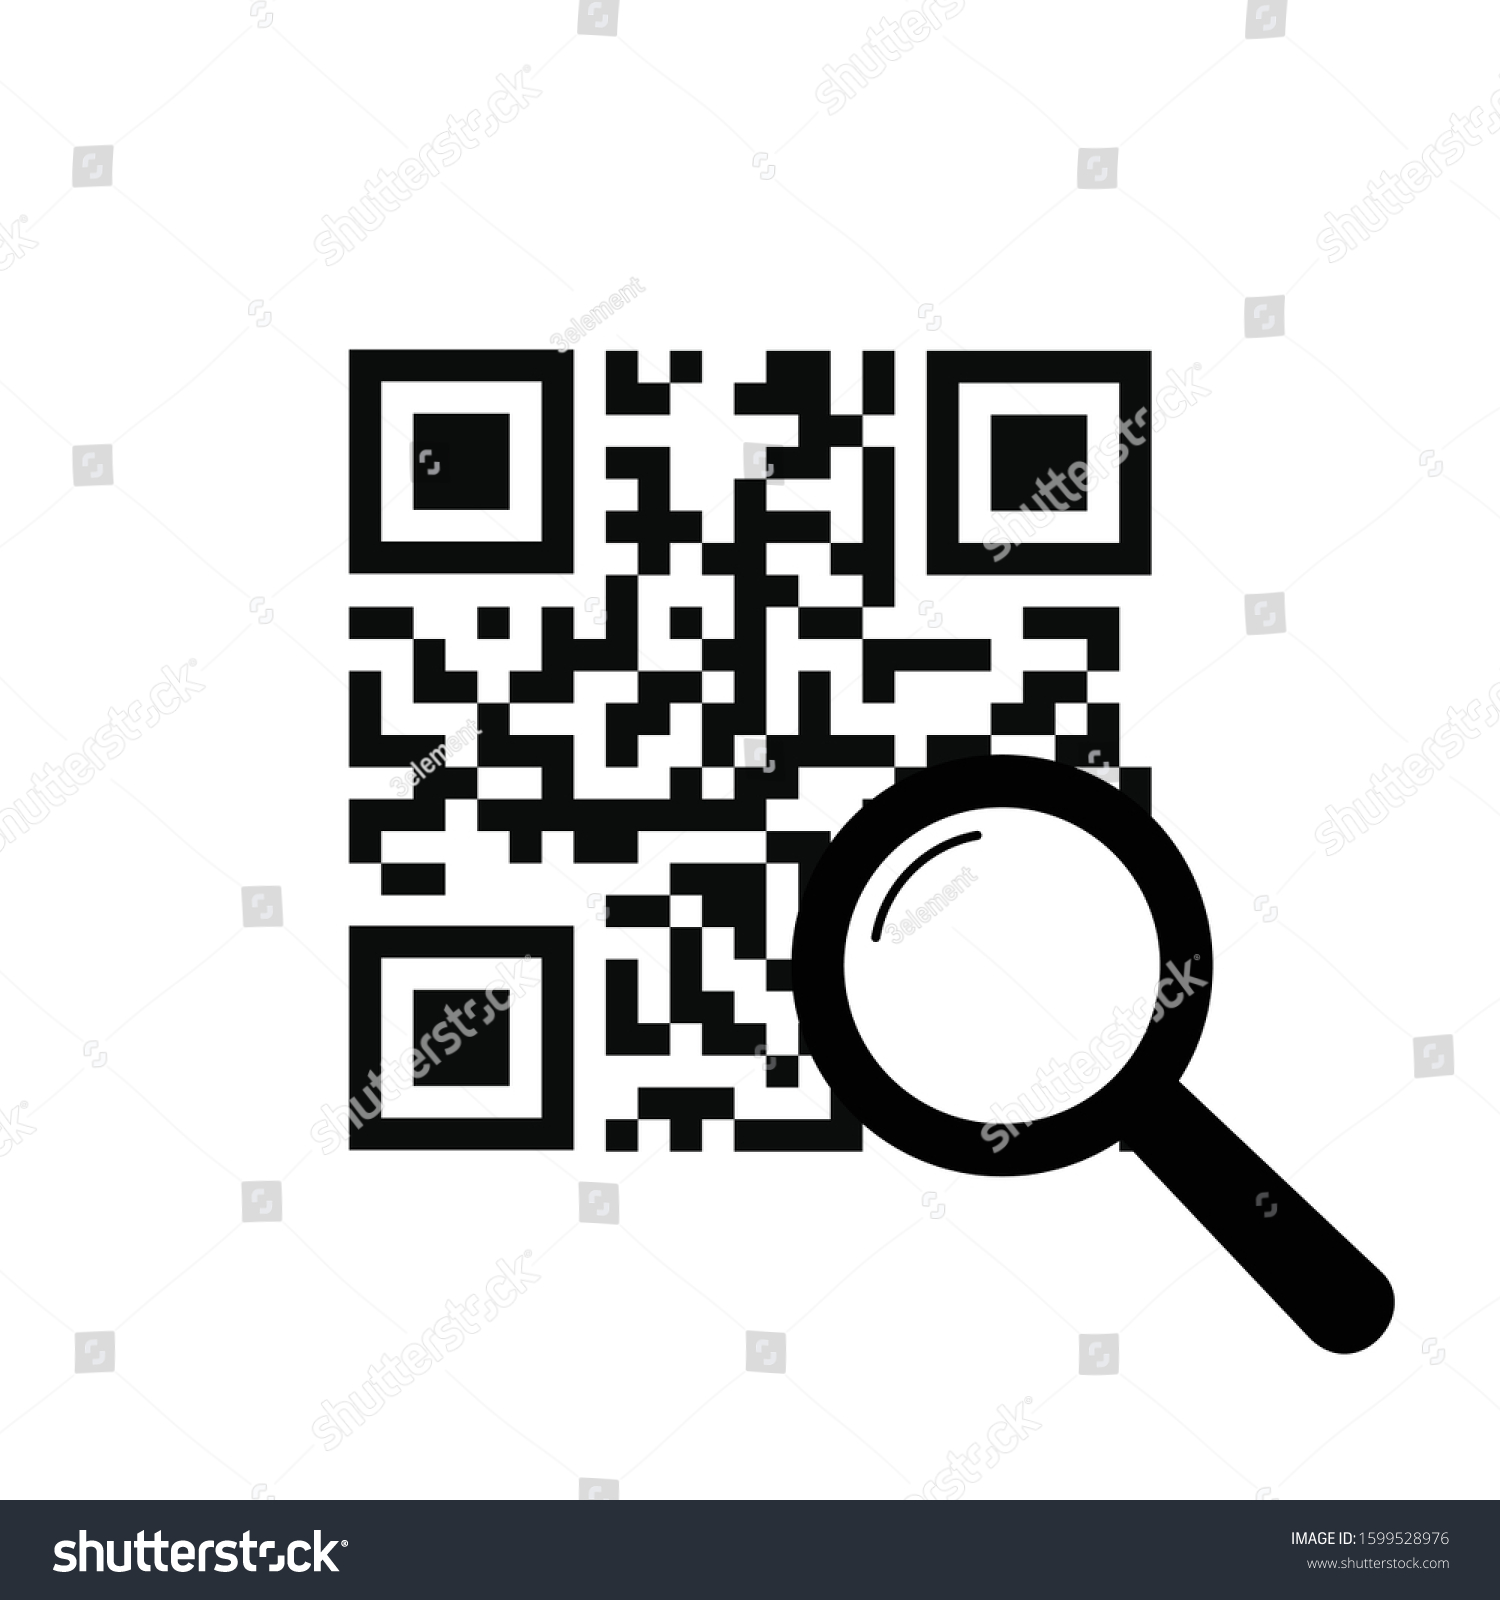 Vector Illustration Of Qr Code Barcode With Royalty Free Stock Vector 1599528976 2939